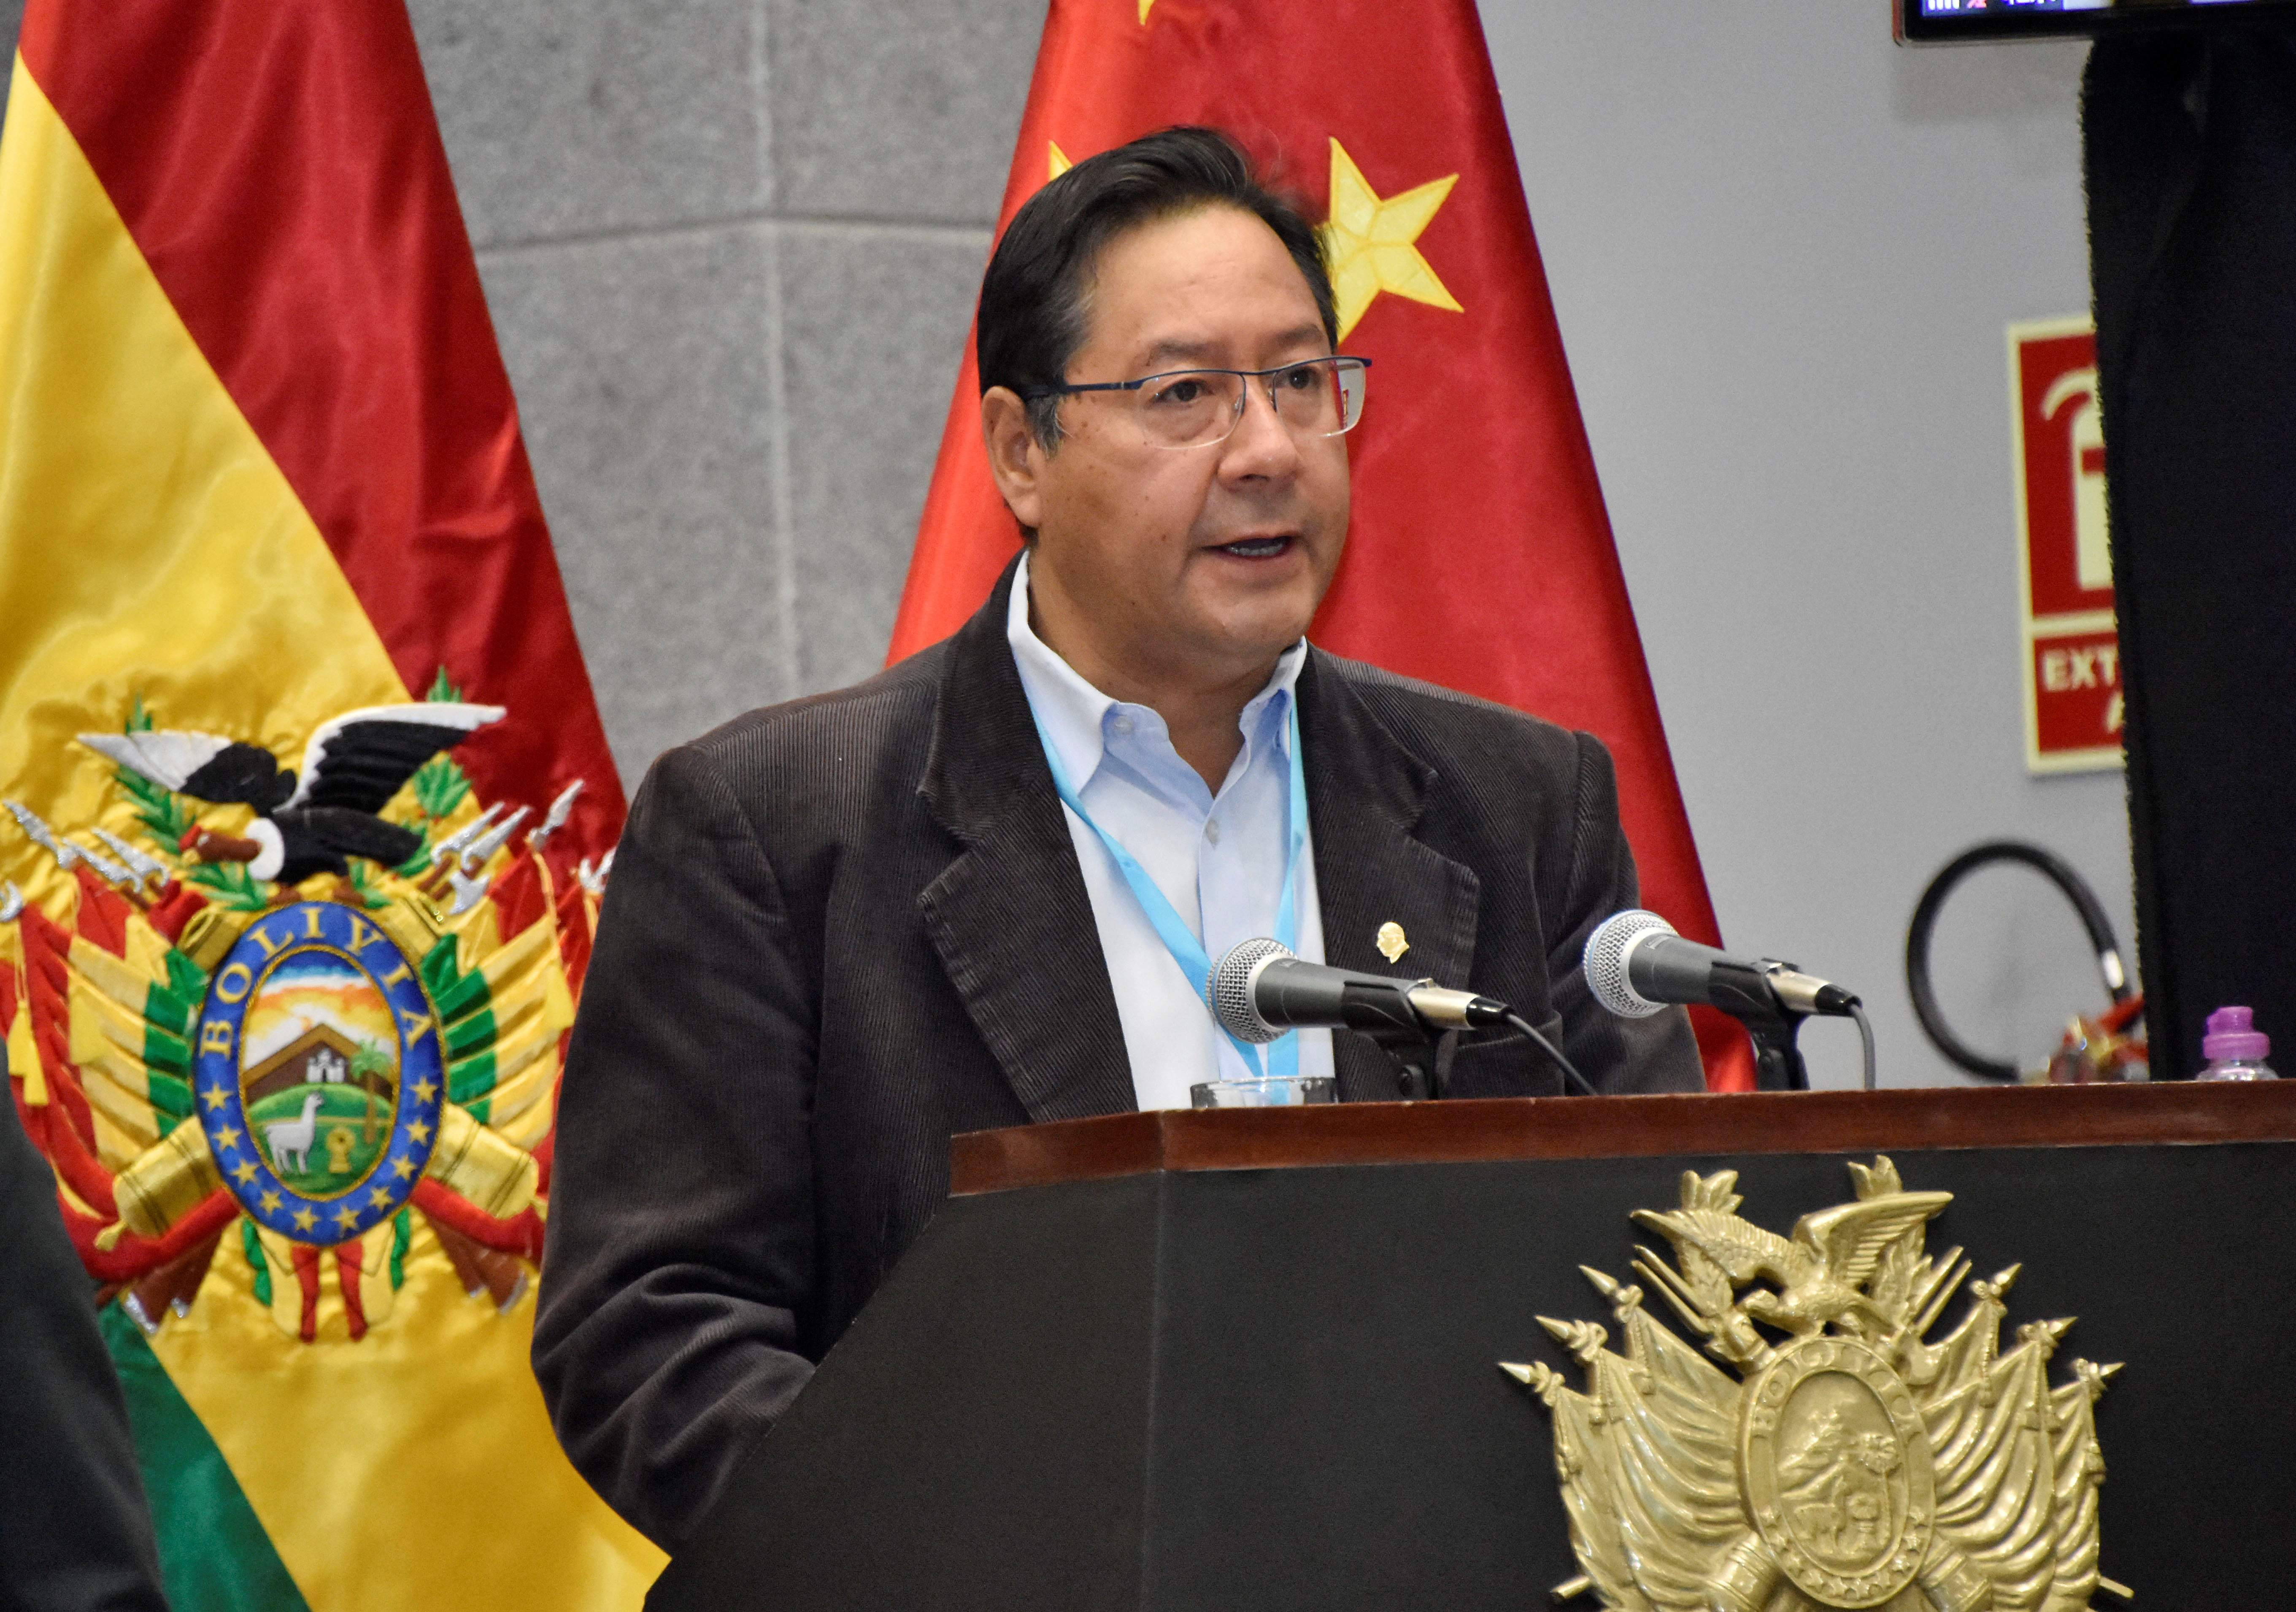 Bolivia's President Luis Arce speaks during a ceremony of the agreement with Chinese Sinopharm, locking in an initial supply of half a million doses of the company's vaccine against the coronavirus disease (COVID-19), at the Casa Grande del Pueblo palace In La Paz, Bolivia, February 11, 2021. Courtesy of Bolivian Presidency/Jorge Mamani/Handout via REUTERS 